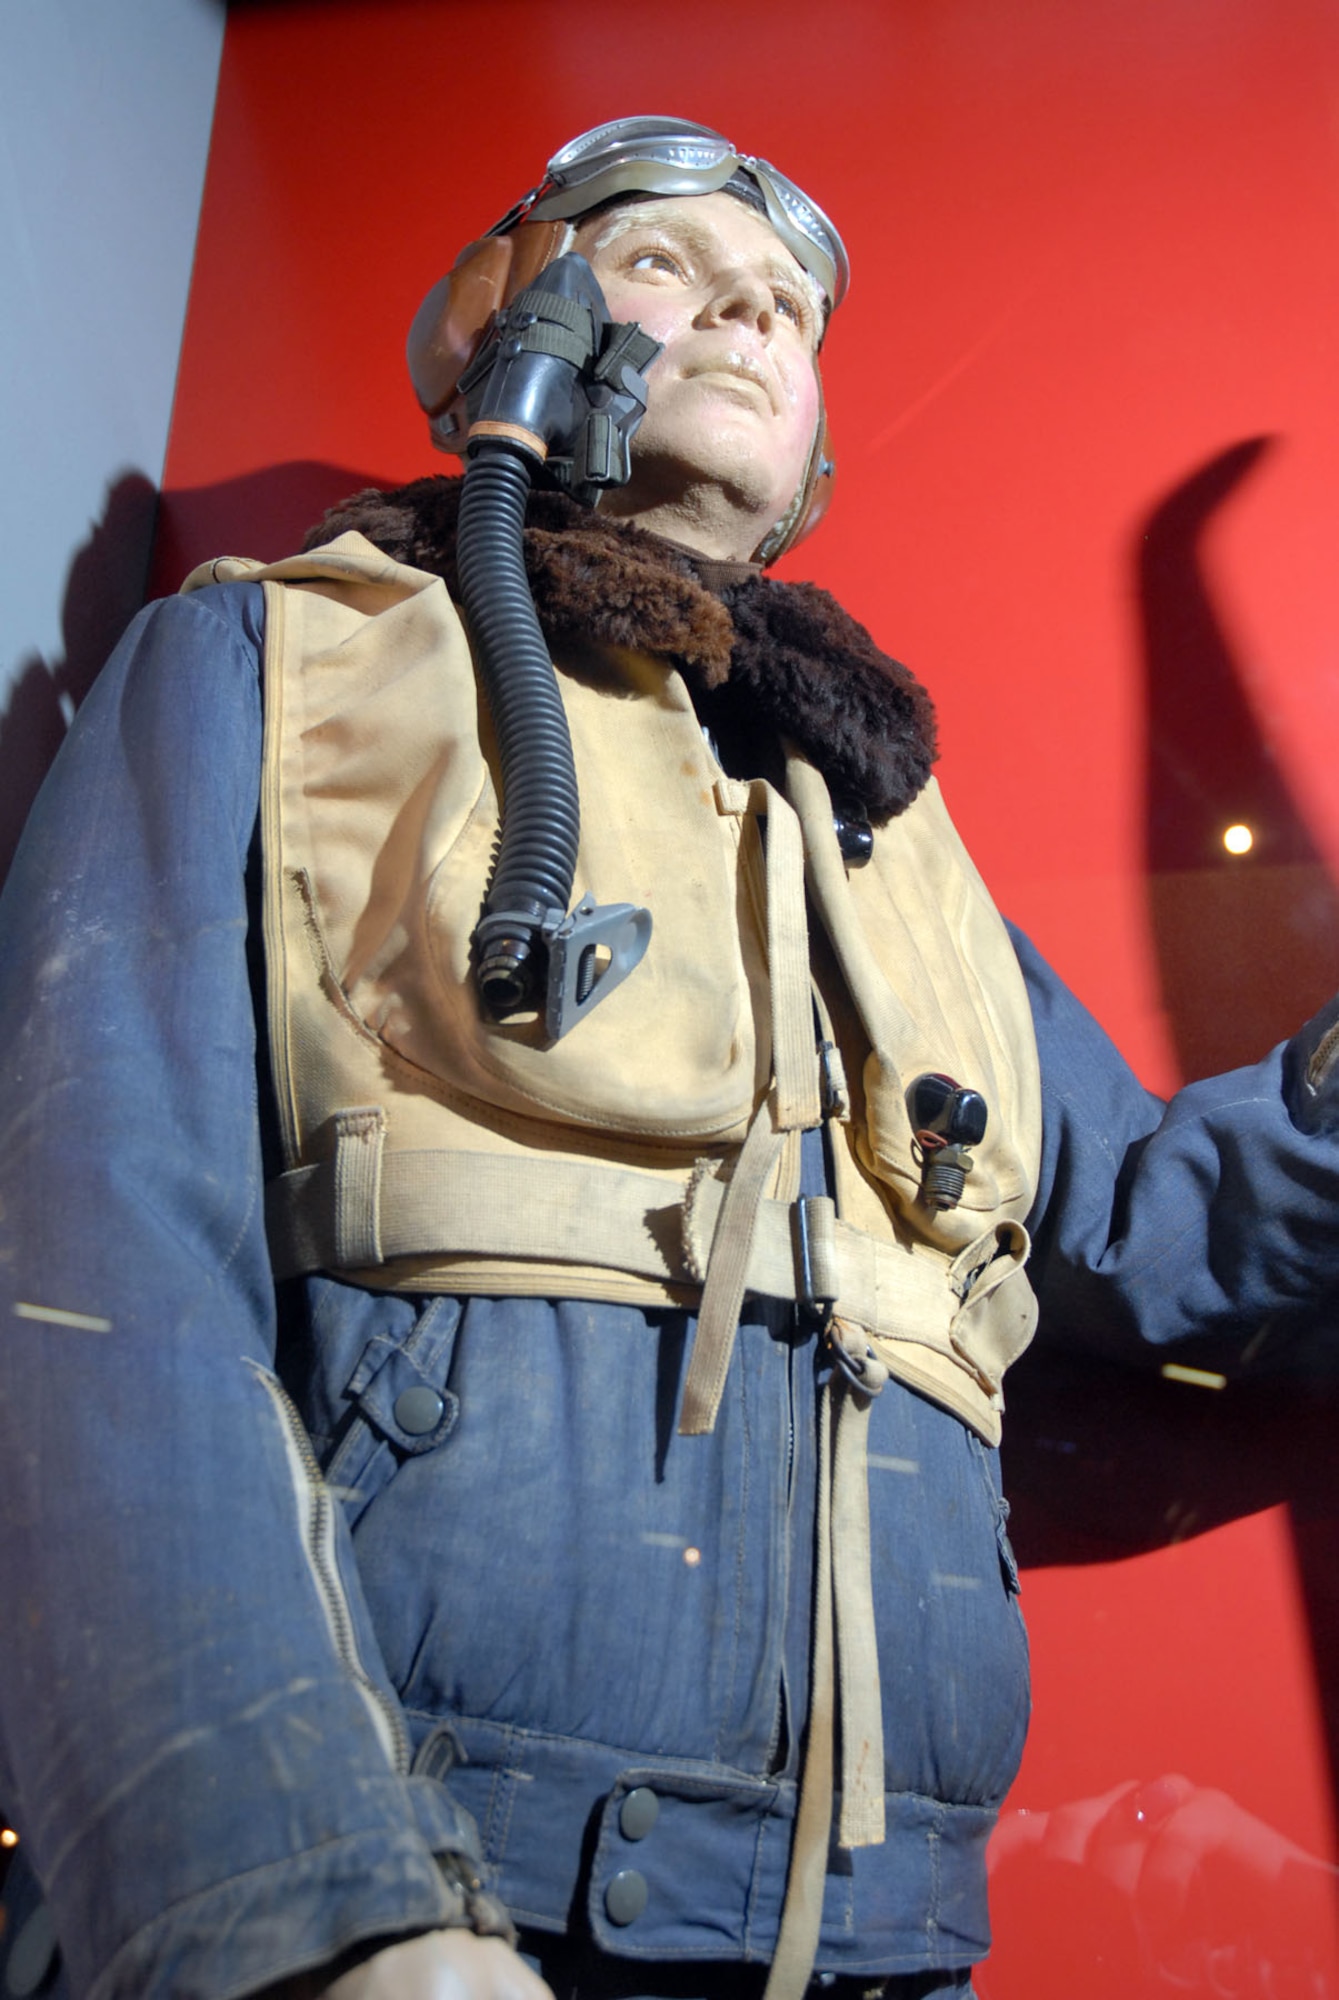 DAYTON, Ohio - The Luftwaffe portion of the WWII: Airmen in a World at War exhibit in the World War II Gallery at the National Museum of the U.S. Air Force. (U.S. Air Force photo)